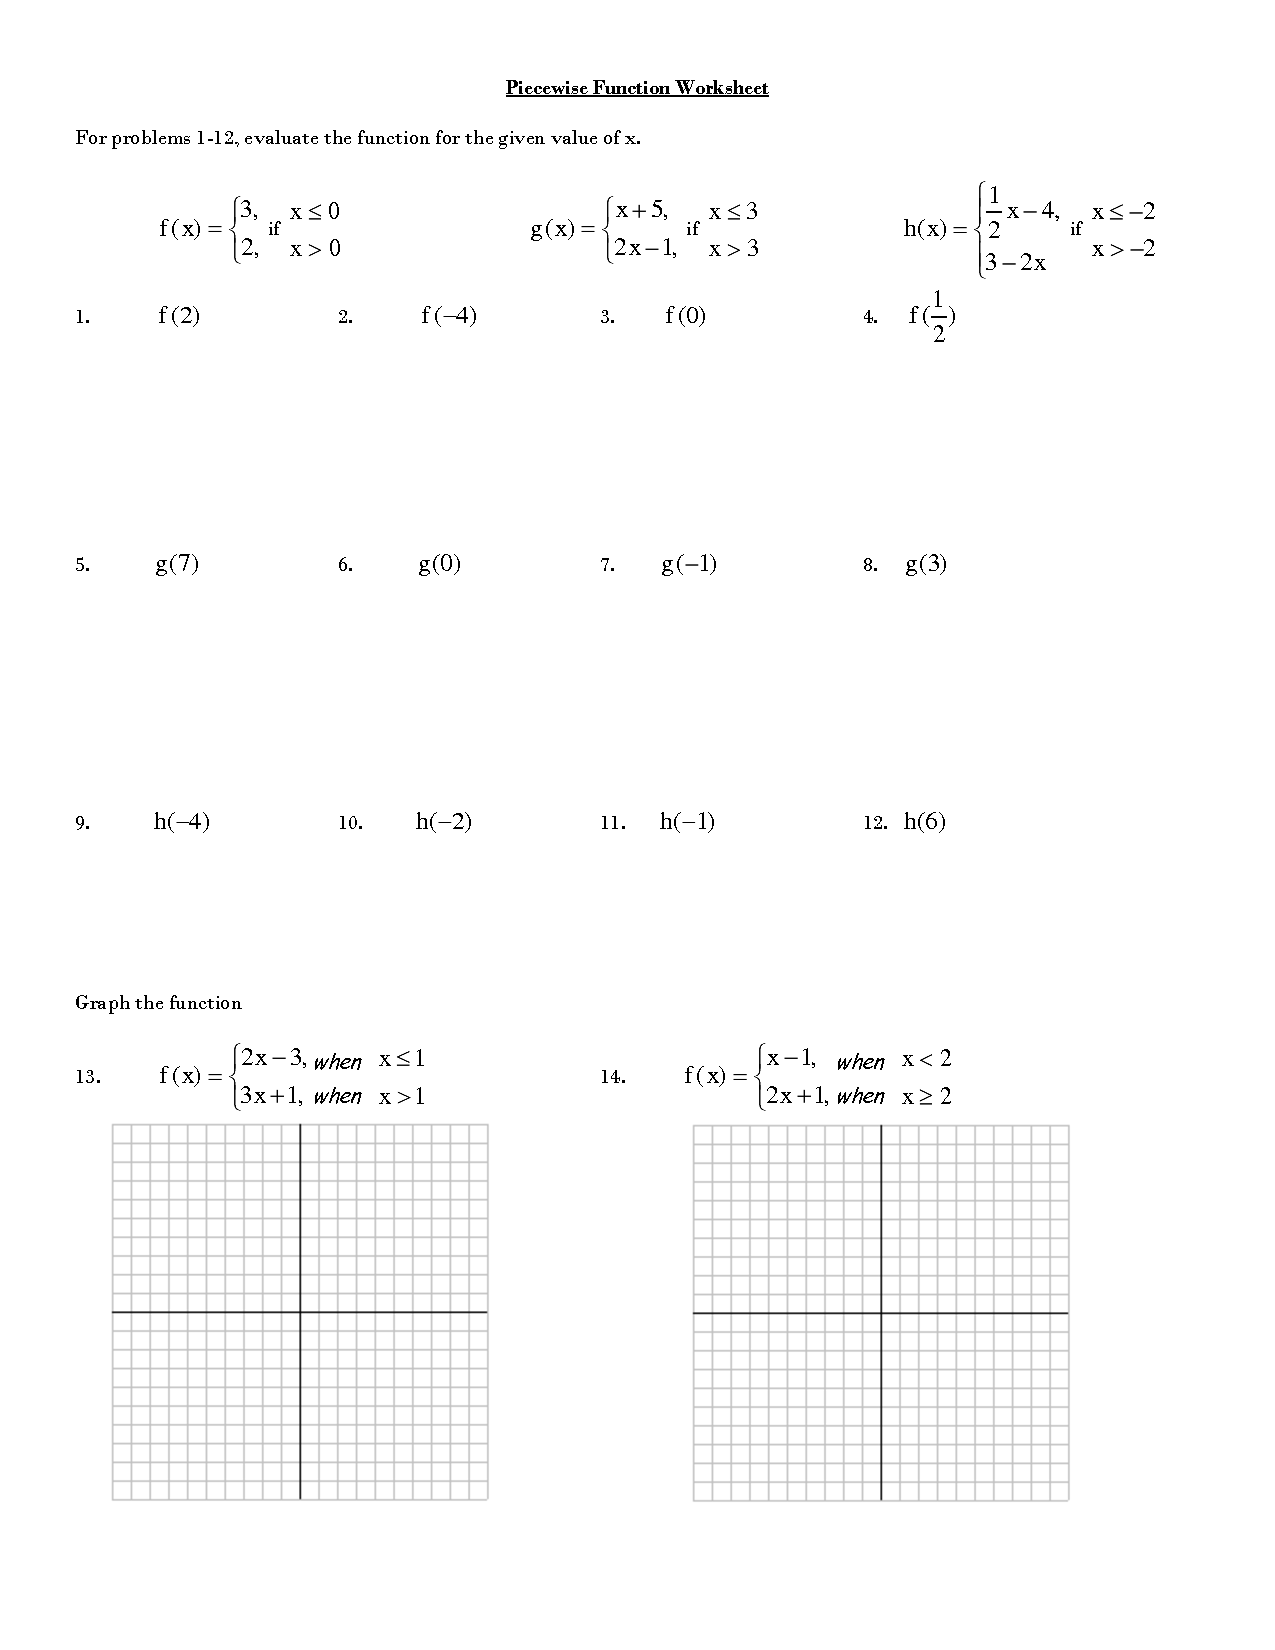 Graphing Linear Functions Worksheet Pdf